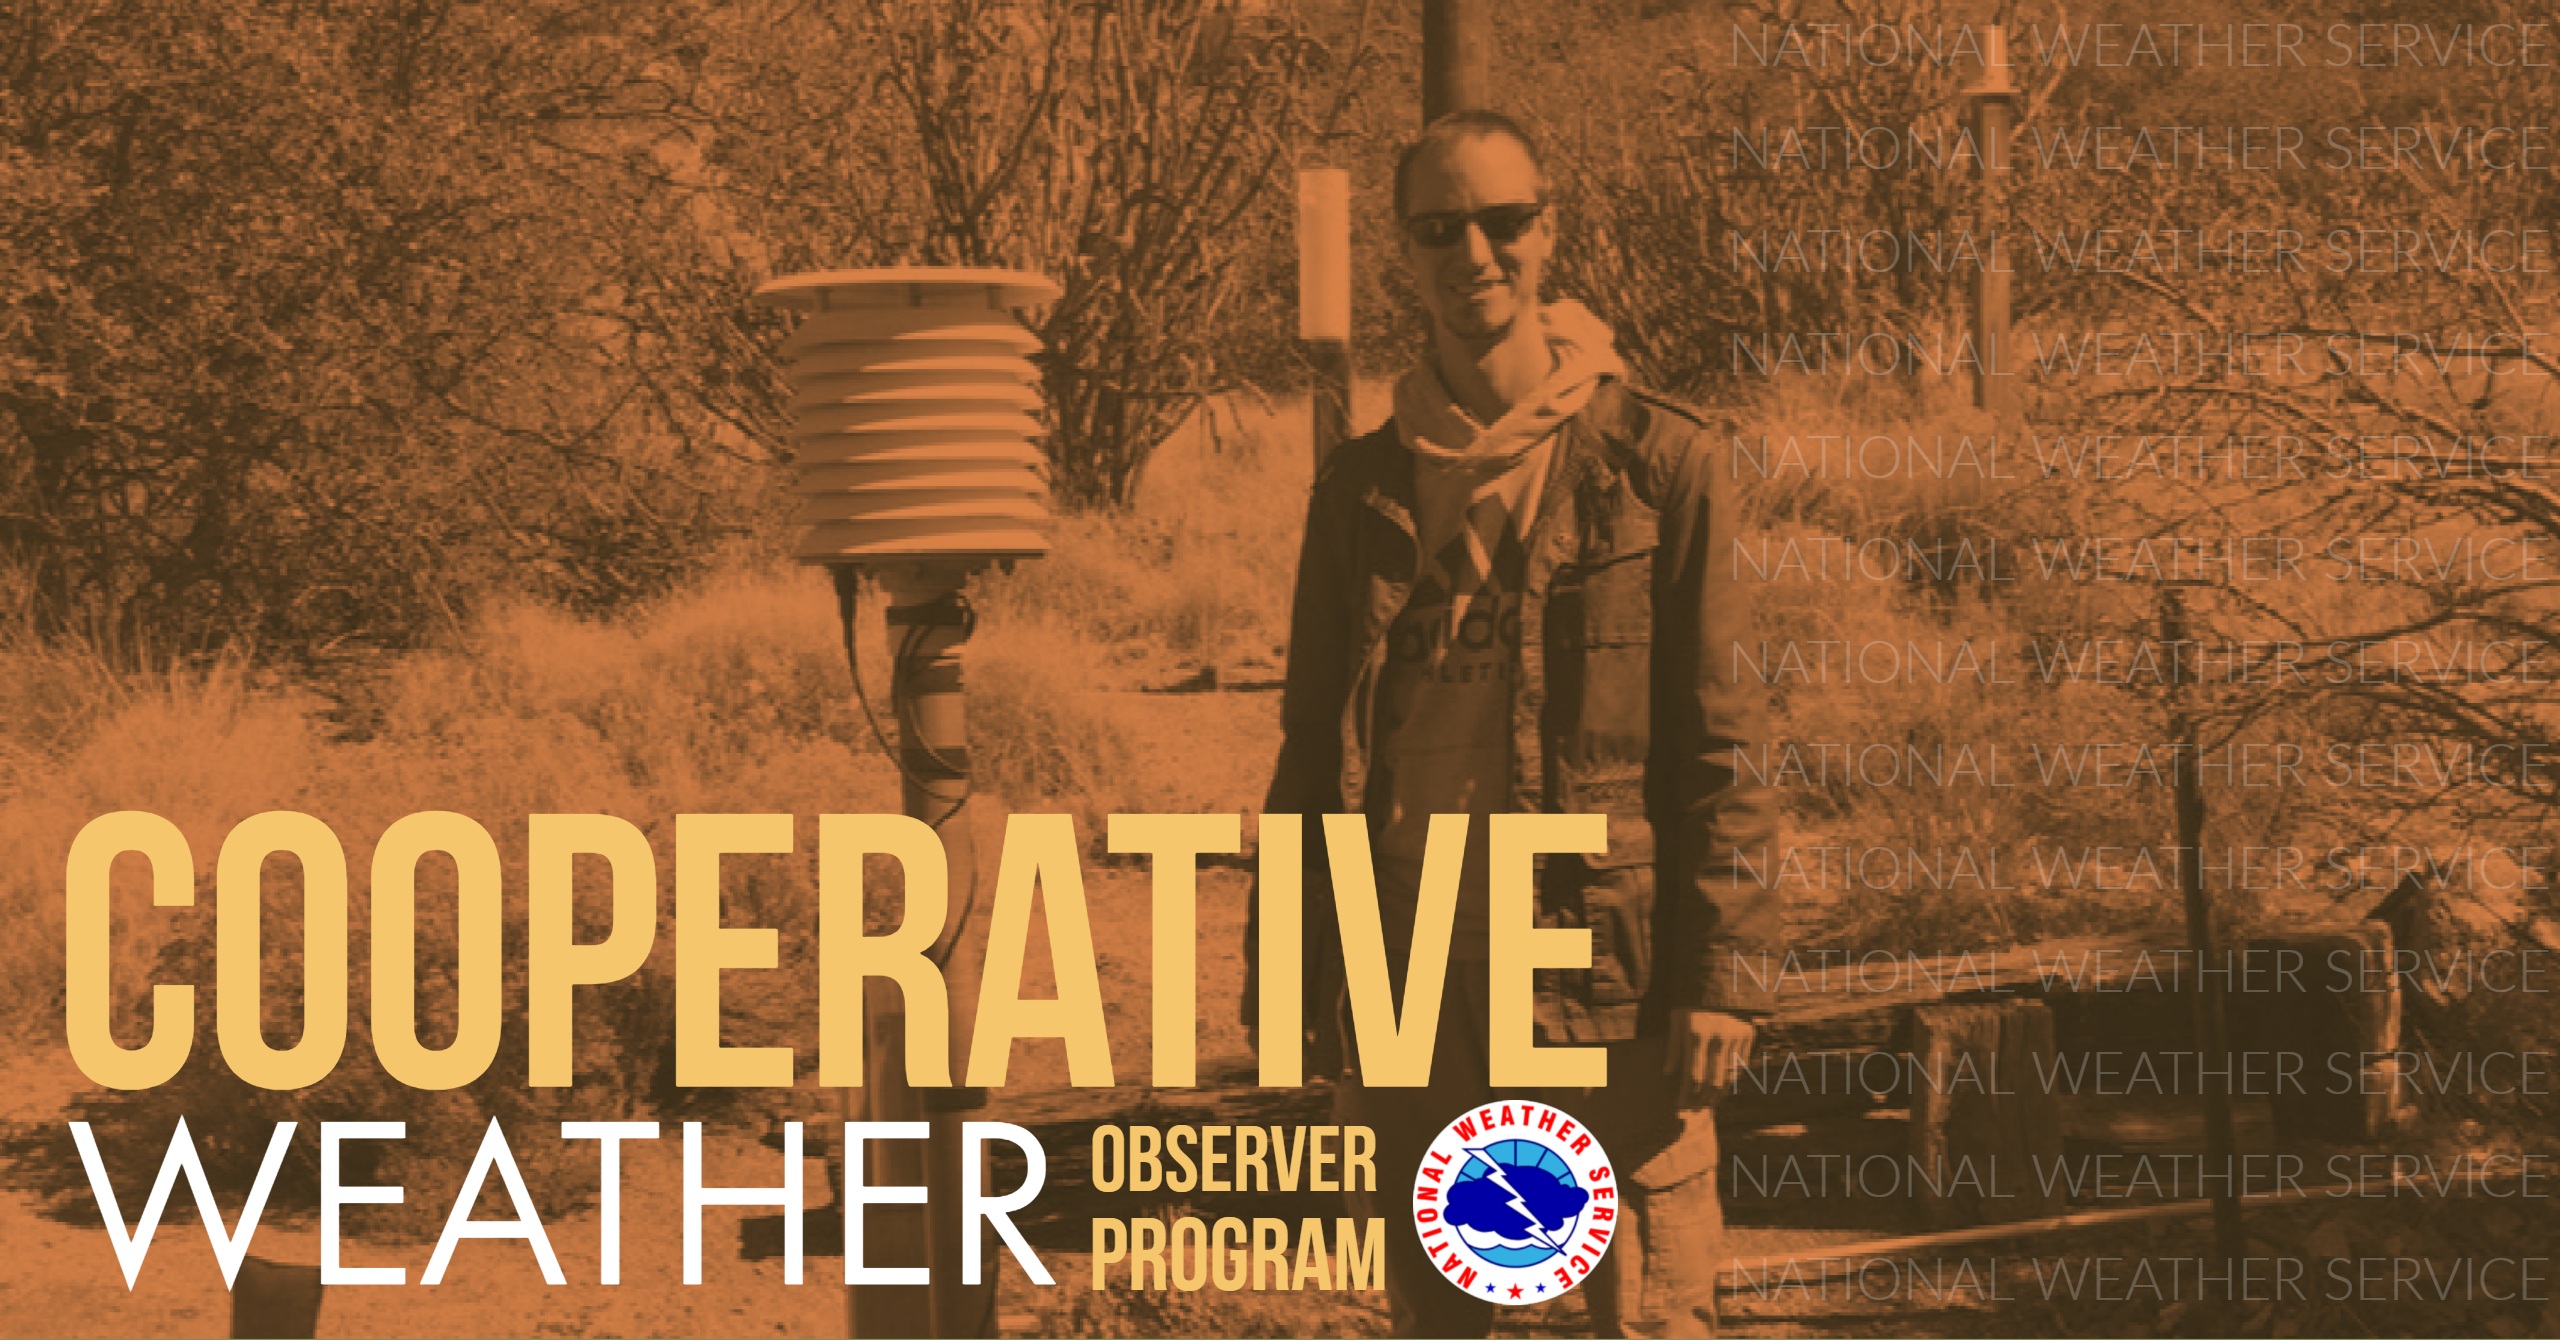 Cooperative Observers are a cornerstone to the National Weather Service.